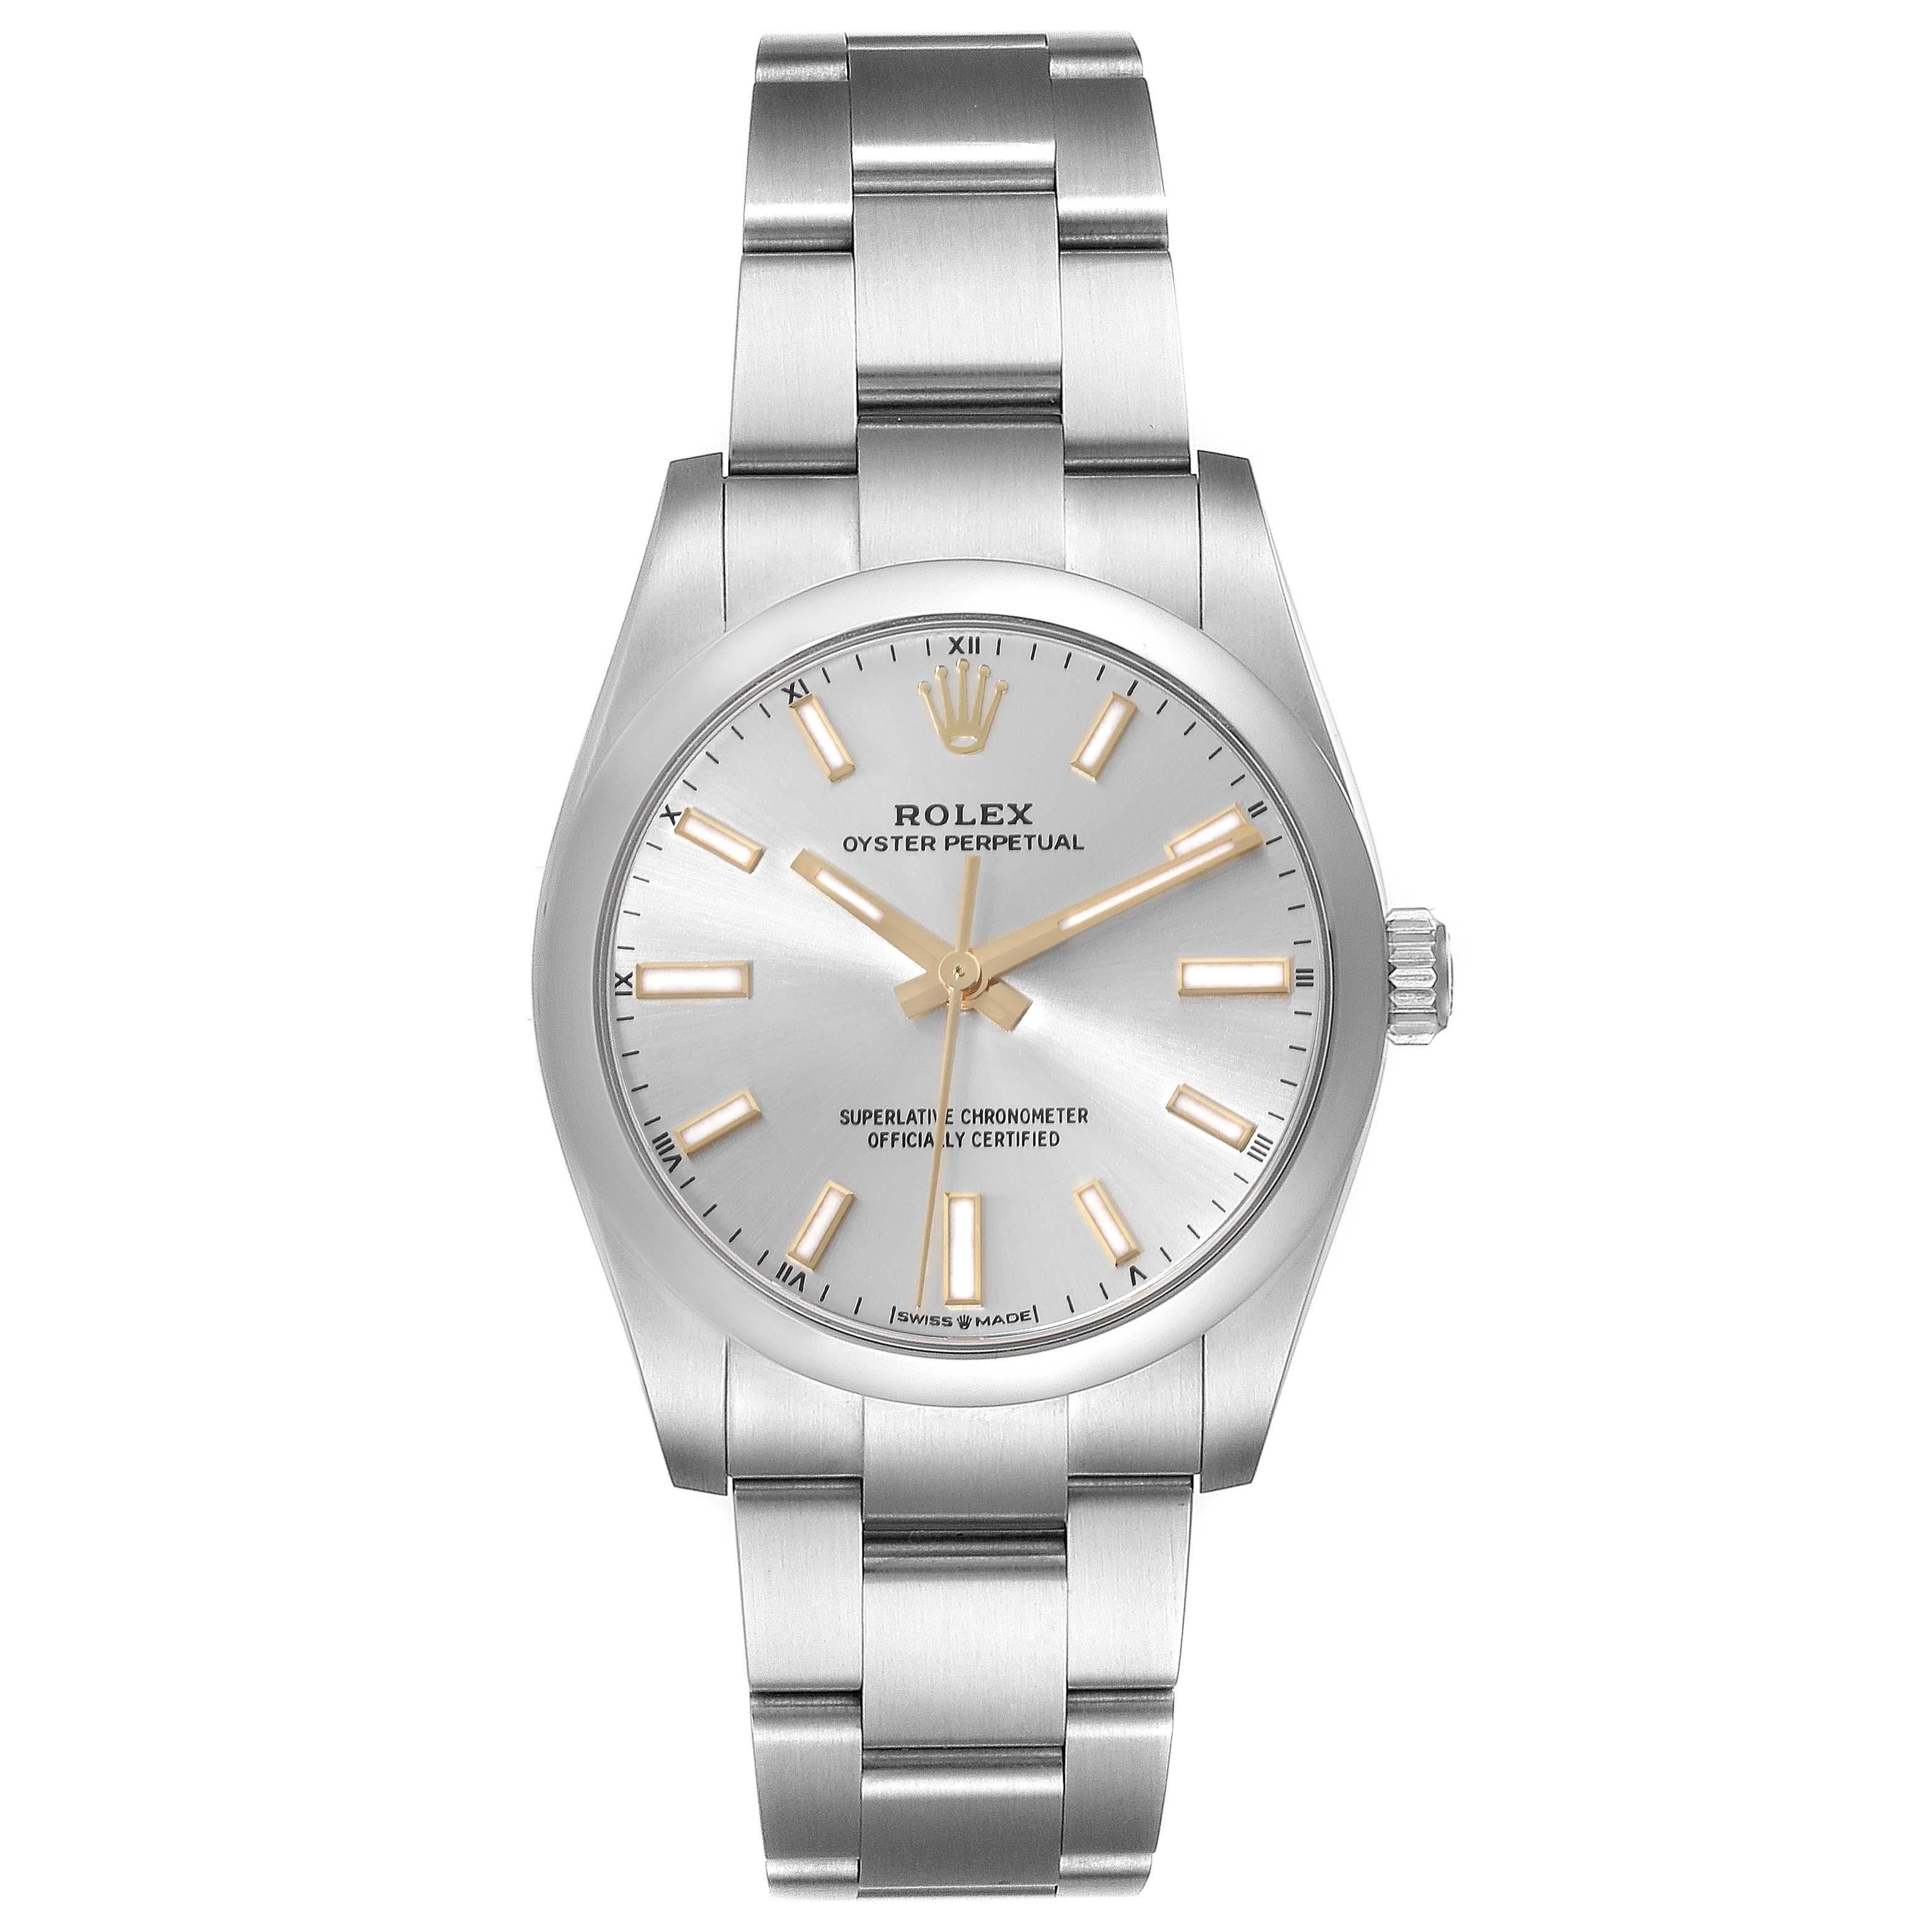 Rolex Oyster Perpetual 34mm Silver Dial Steel Mens Watch 124200 Unworn. Officially certified chronometer automatic self-winding movement. Stainless steel case 34 mm in diameter. Rolex logo on a crown. Stainless steel smooth domed bezel. Scratch